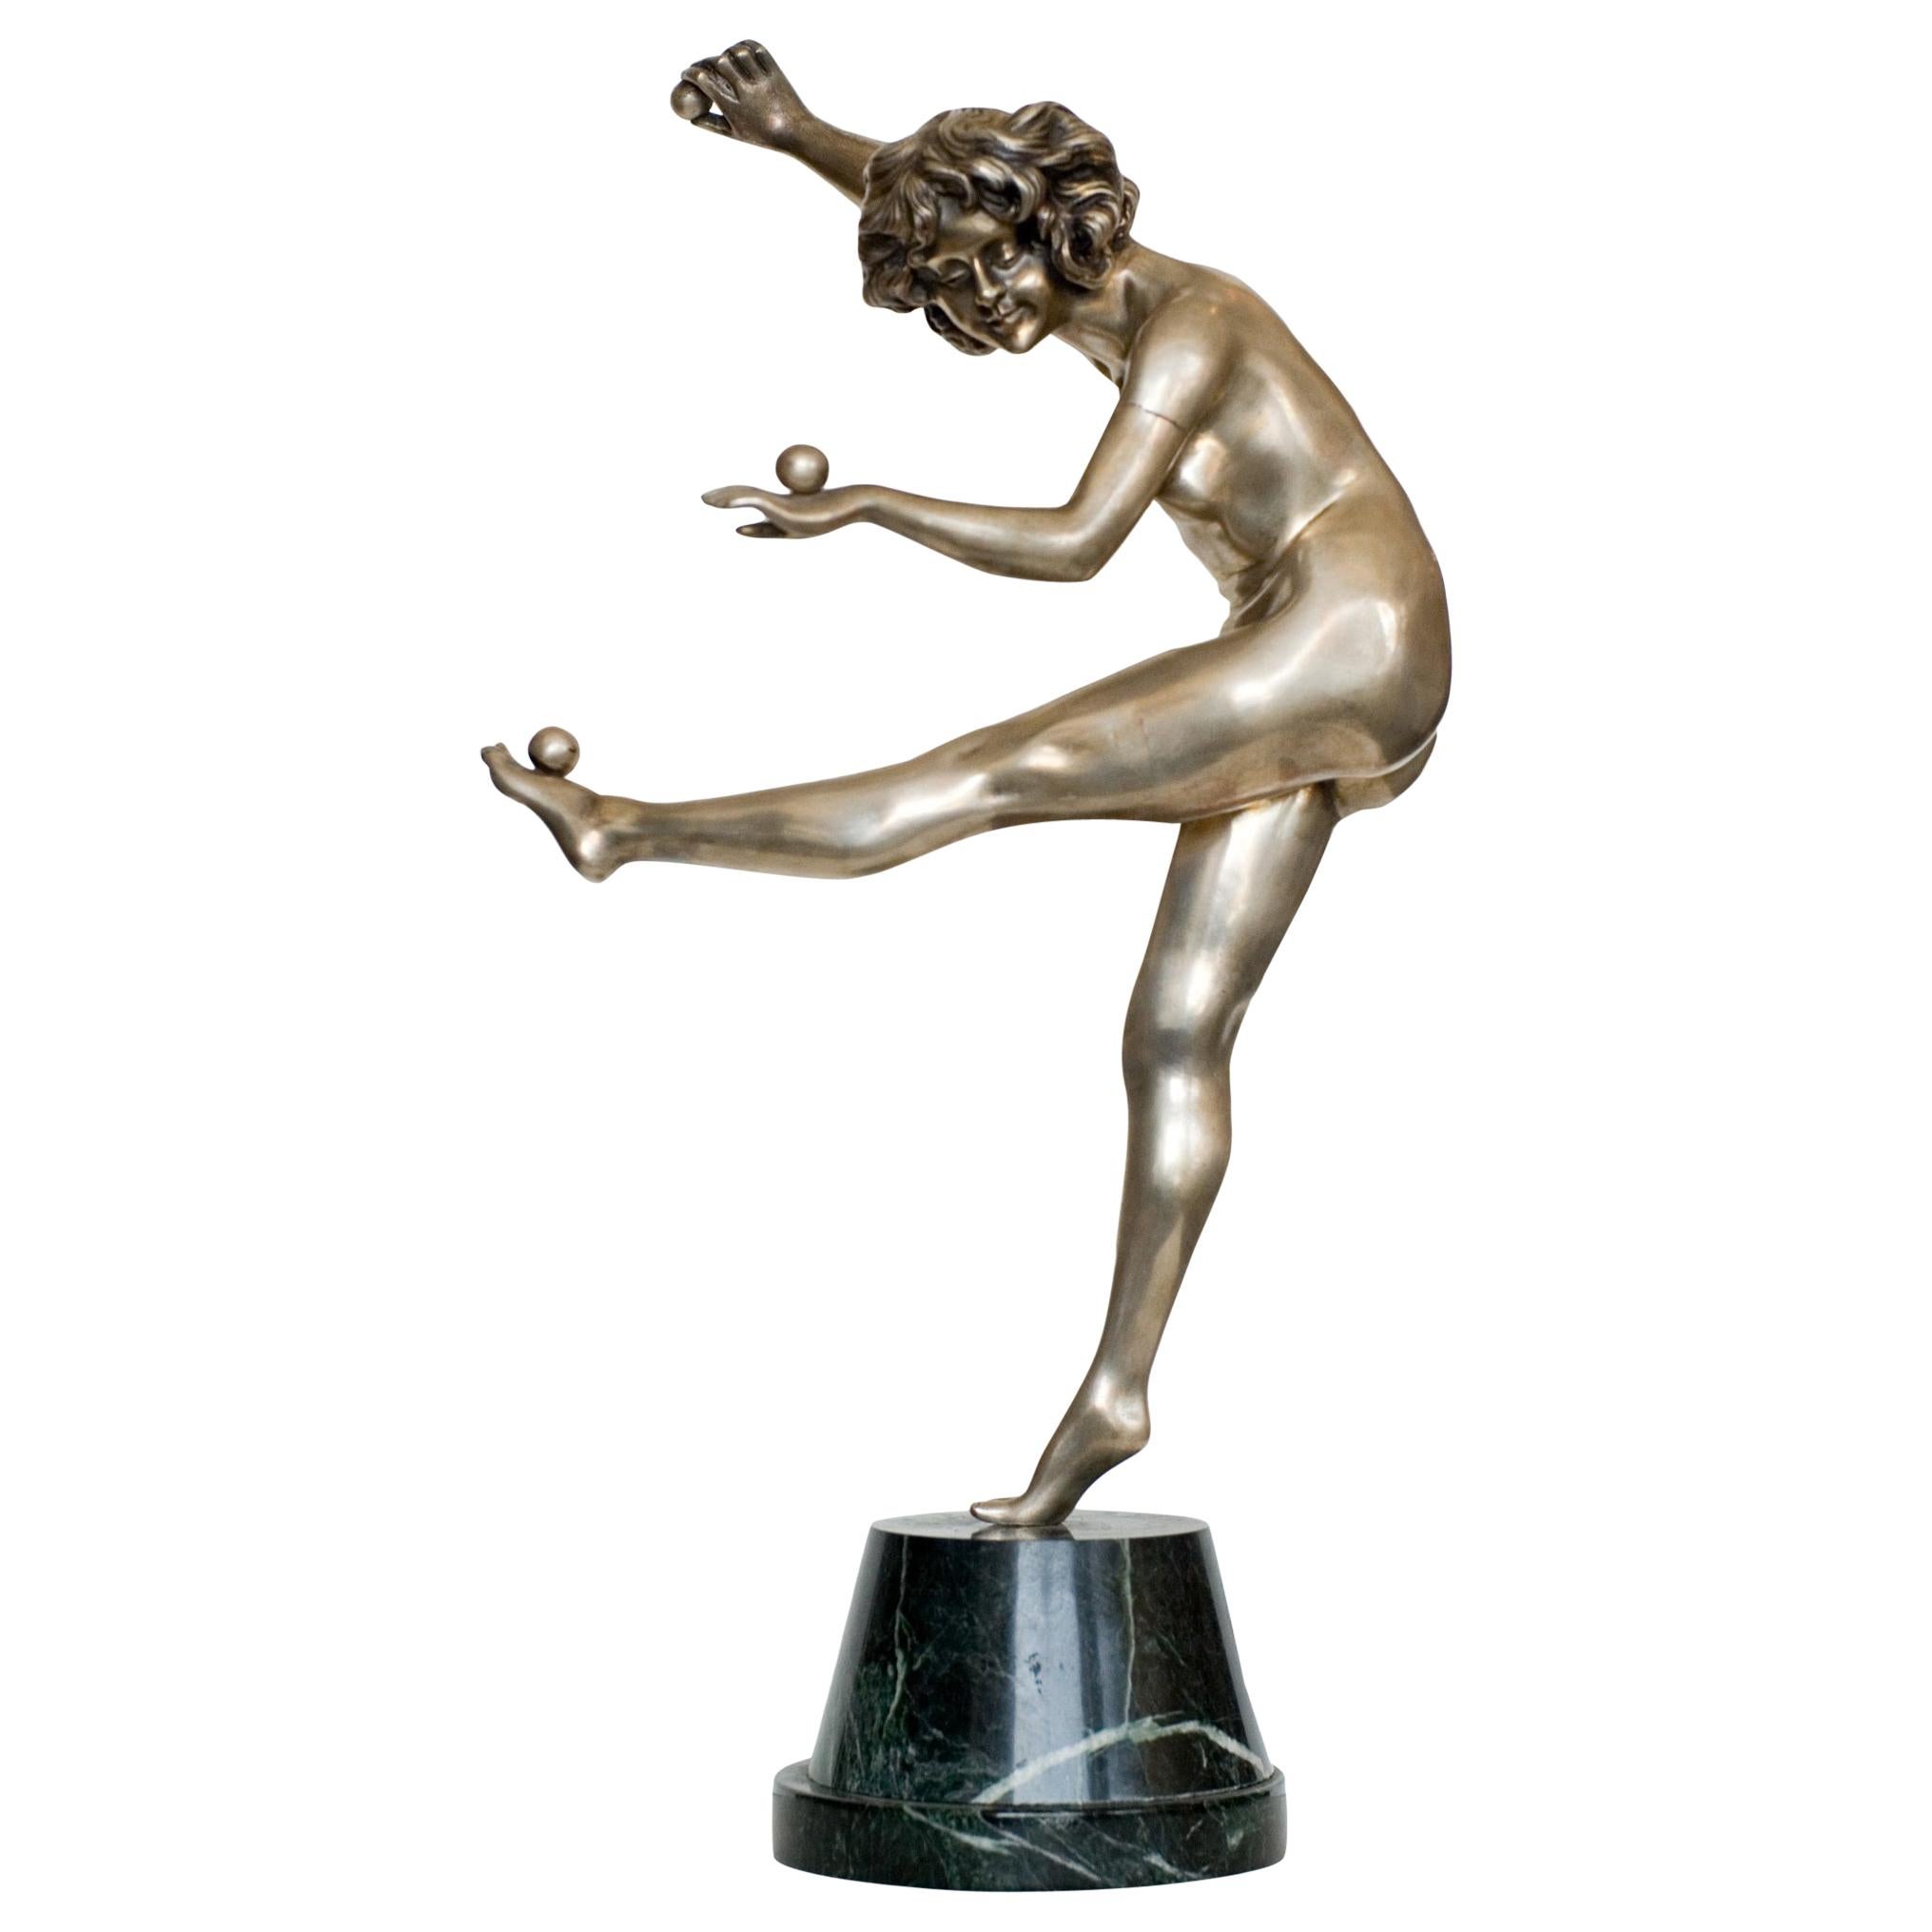 French Art Deco Bronze Figure 'Trickstress' by CJR Colinet